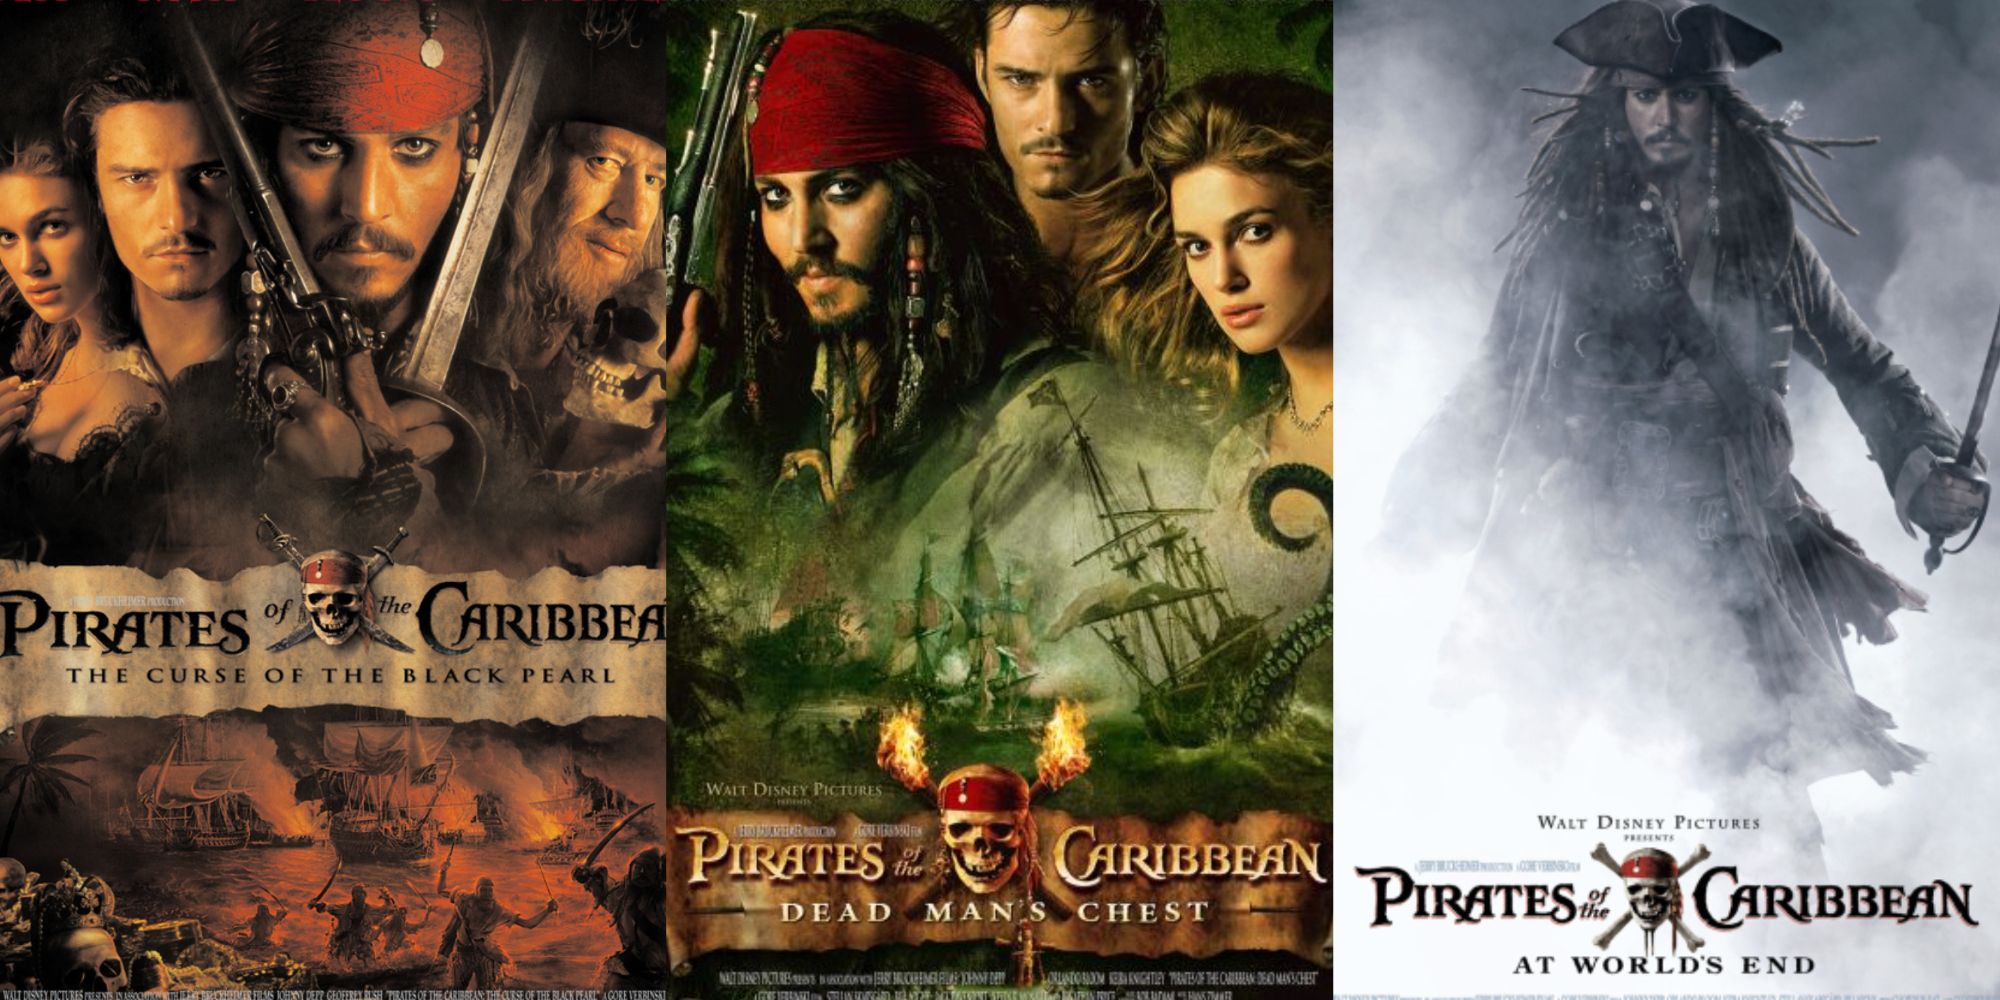 pirates-of-the-caribbean-the-curse-of-the-black-pearl-dead-mans-chest-at-worlds-end-film-covers